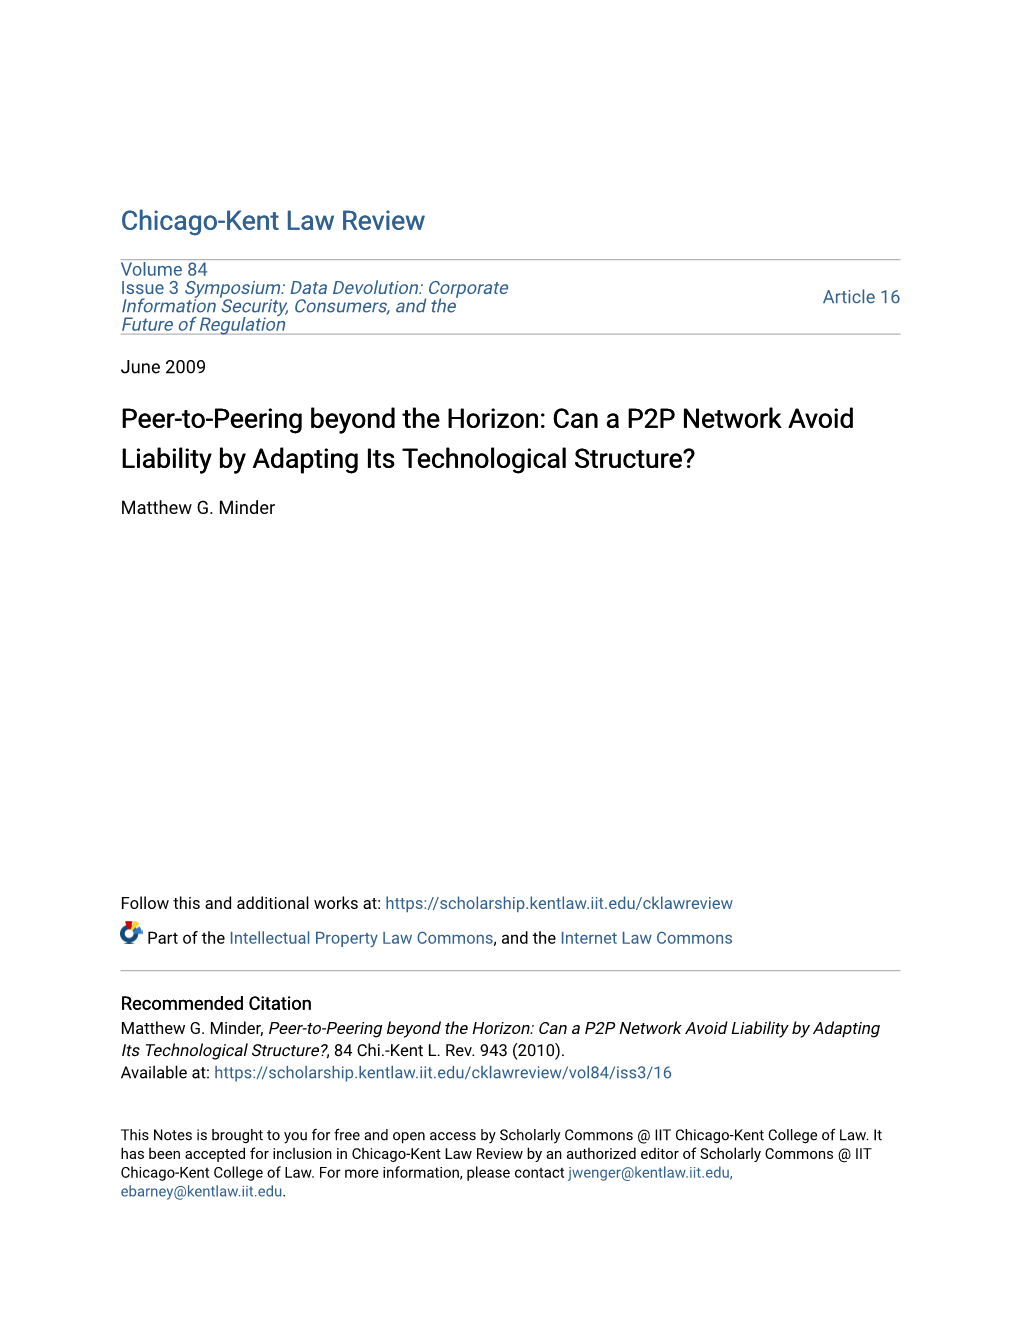 Can a P2P Network Avoid Liability by Adapting Its Technological Structure?